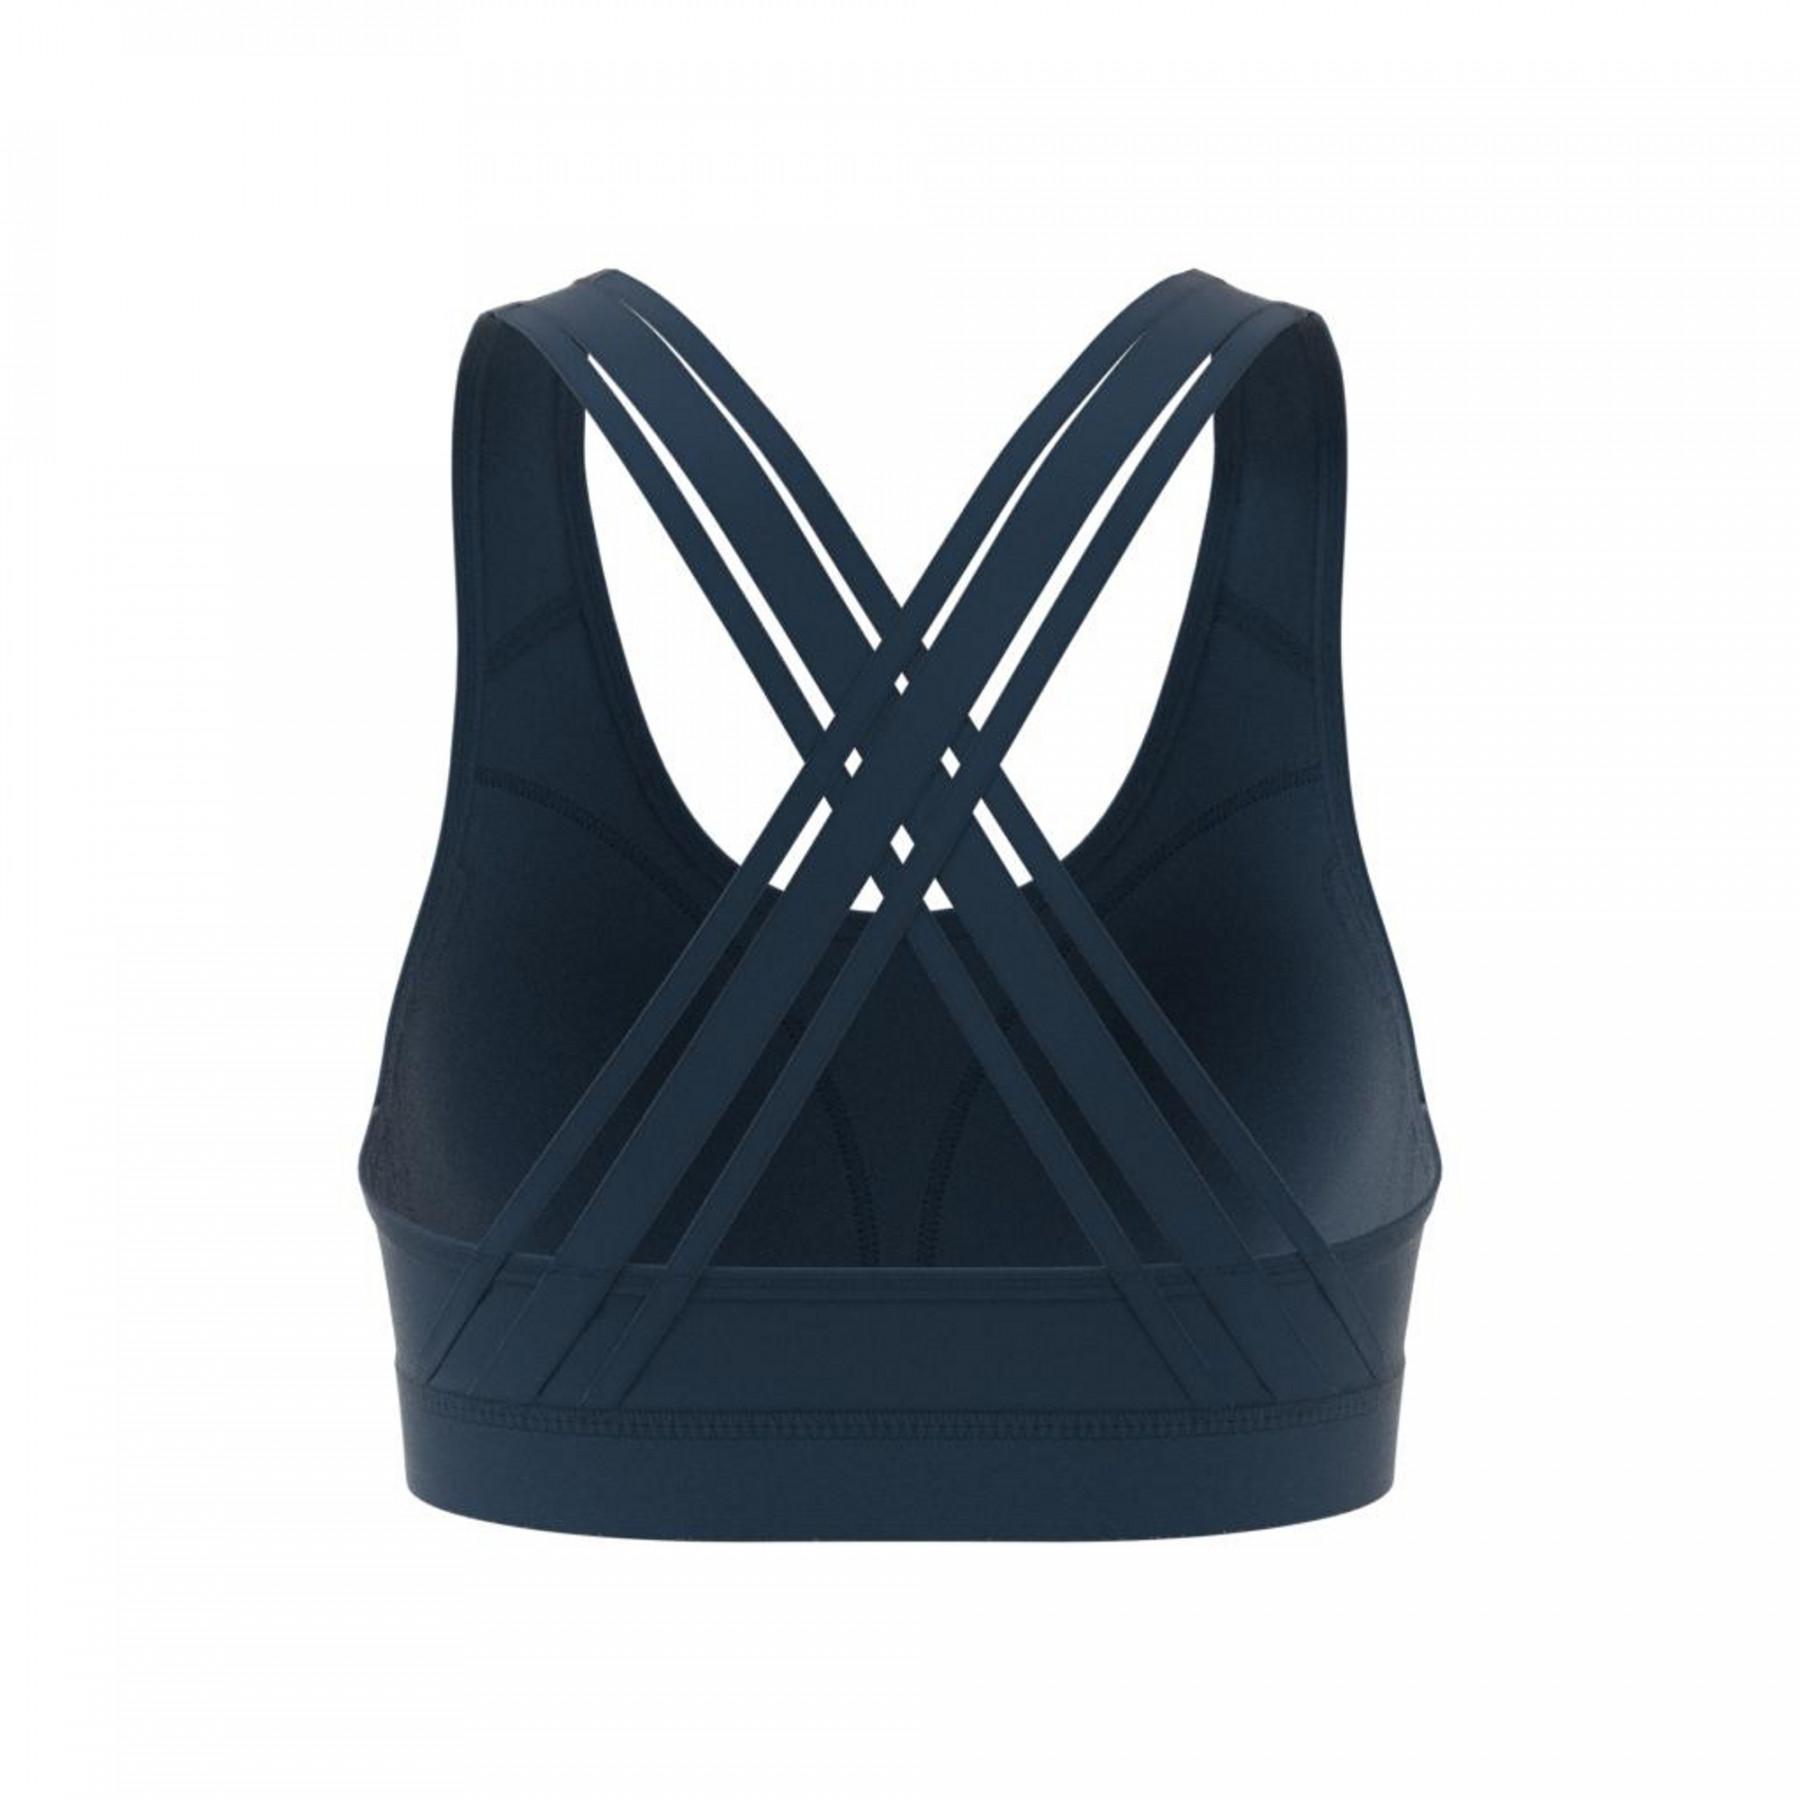 Brassière femme adidas Believe This Lace Up